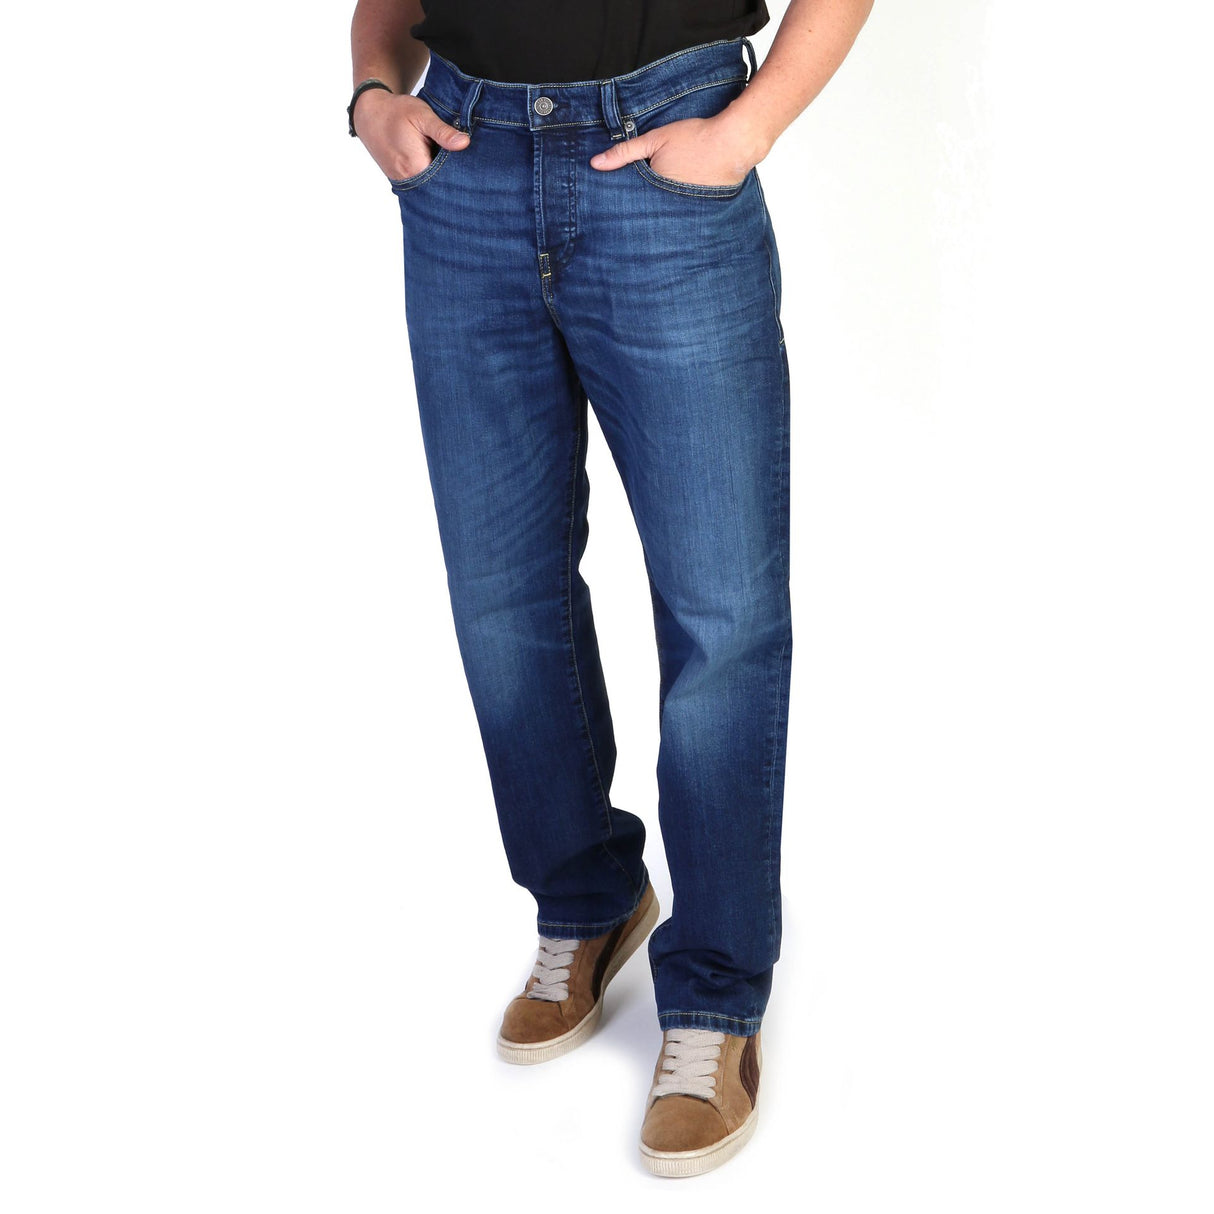 Men's jeans Regular fit jeans Cotton jeans Stretch jeans Solid color jeans Button fly jeans 5-pocket jeans Machine washable jeans Casual jeans Everyday jeans Visible logo jeans 